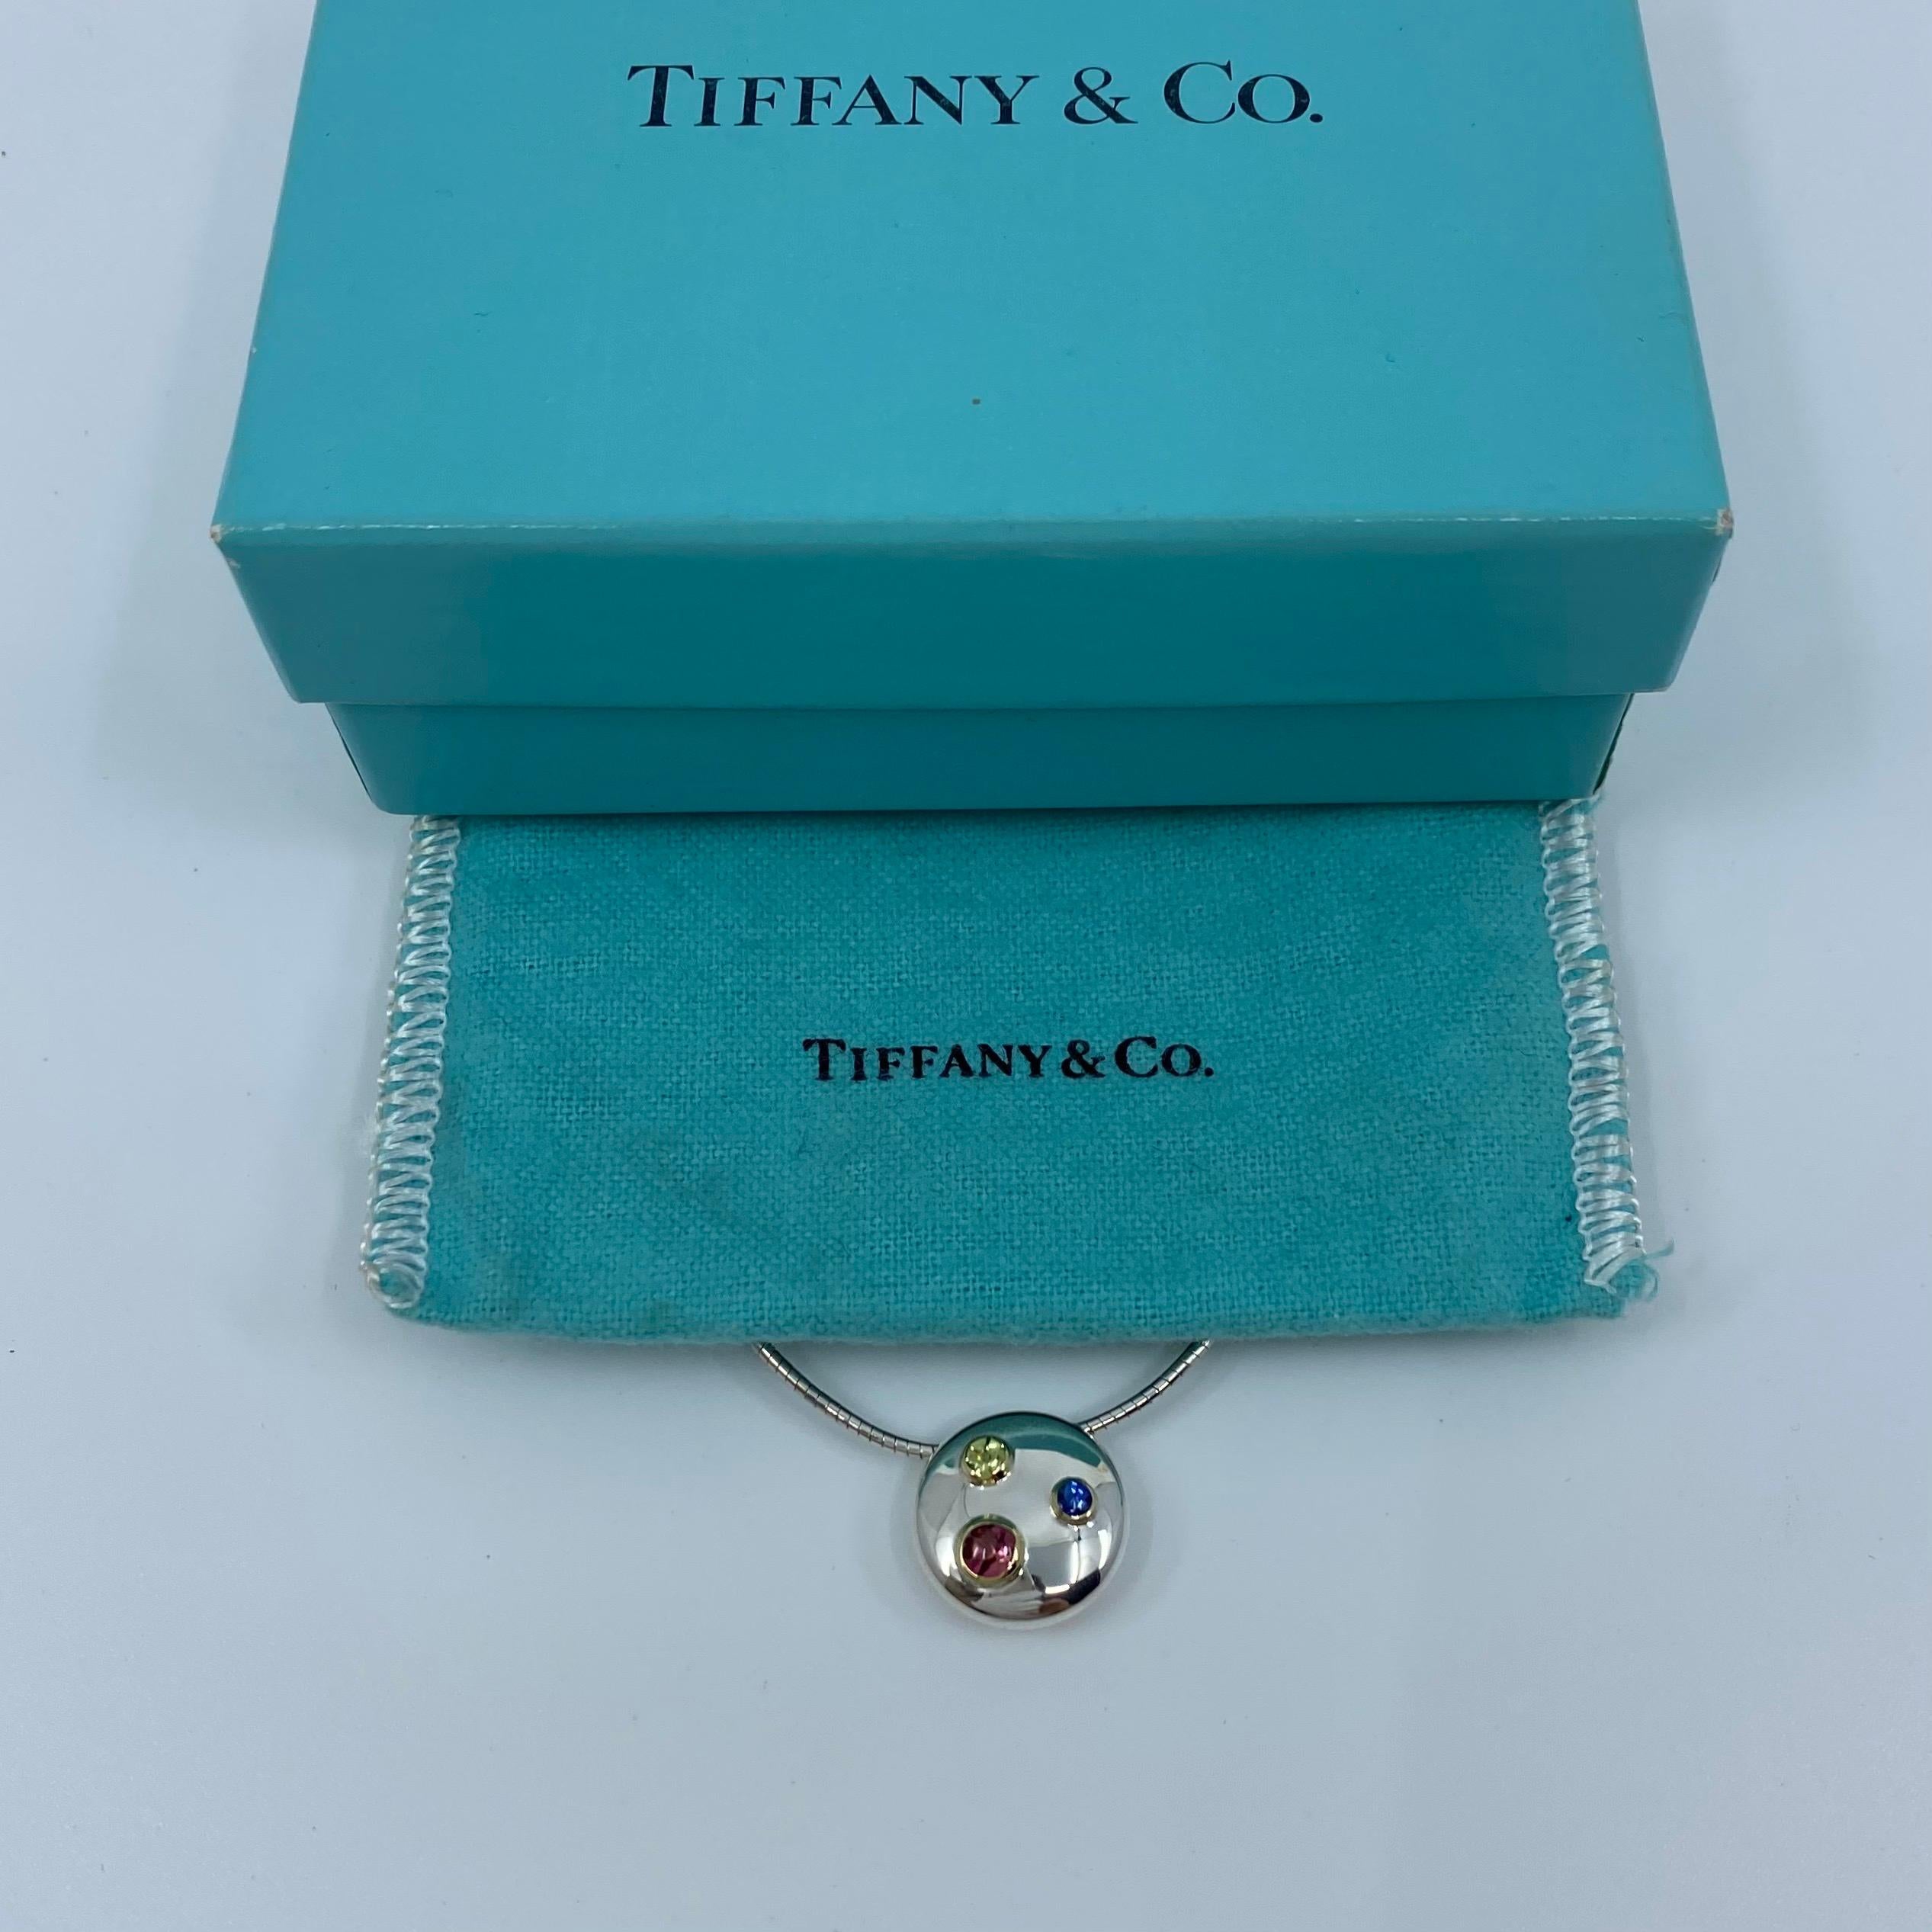 Rare Tiffany & Co. Etoile 18 Karat Yellow Gold & Silver Coloured Gemstone Pendant Necklace.

A beautiful and unique silver and 18k yellow gold pendant necklace set with a blue sapphire, pink tourmaline and green peridot. All excellent quality